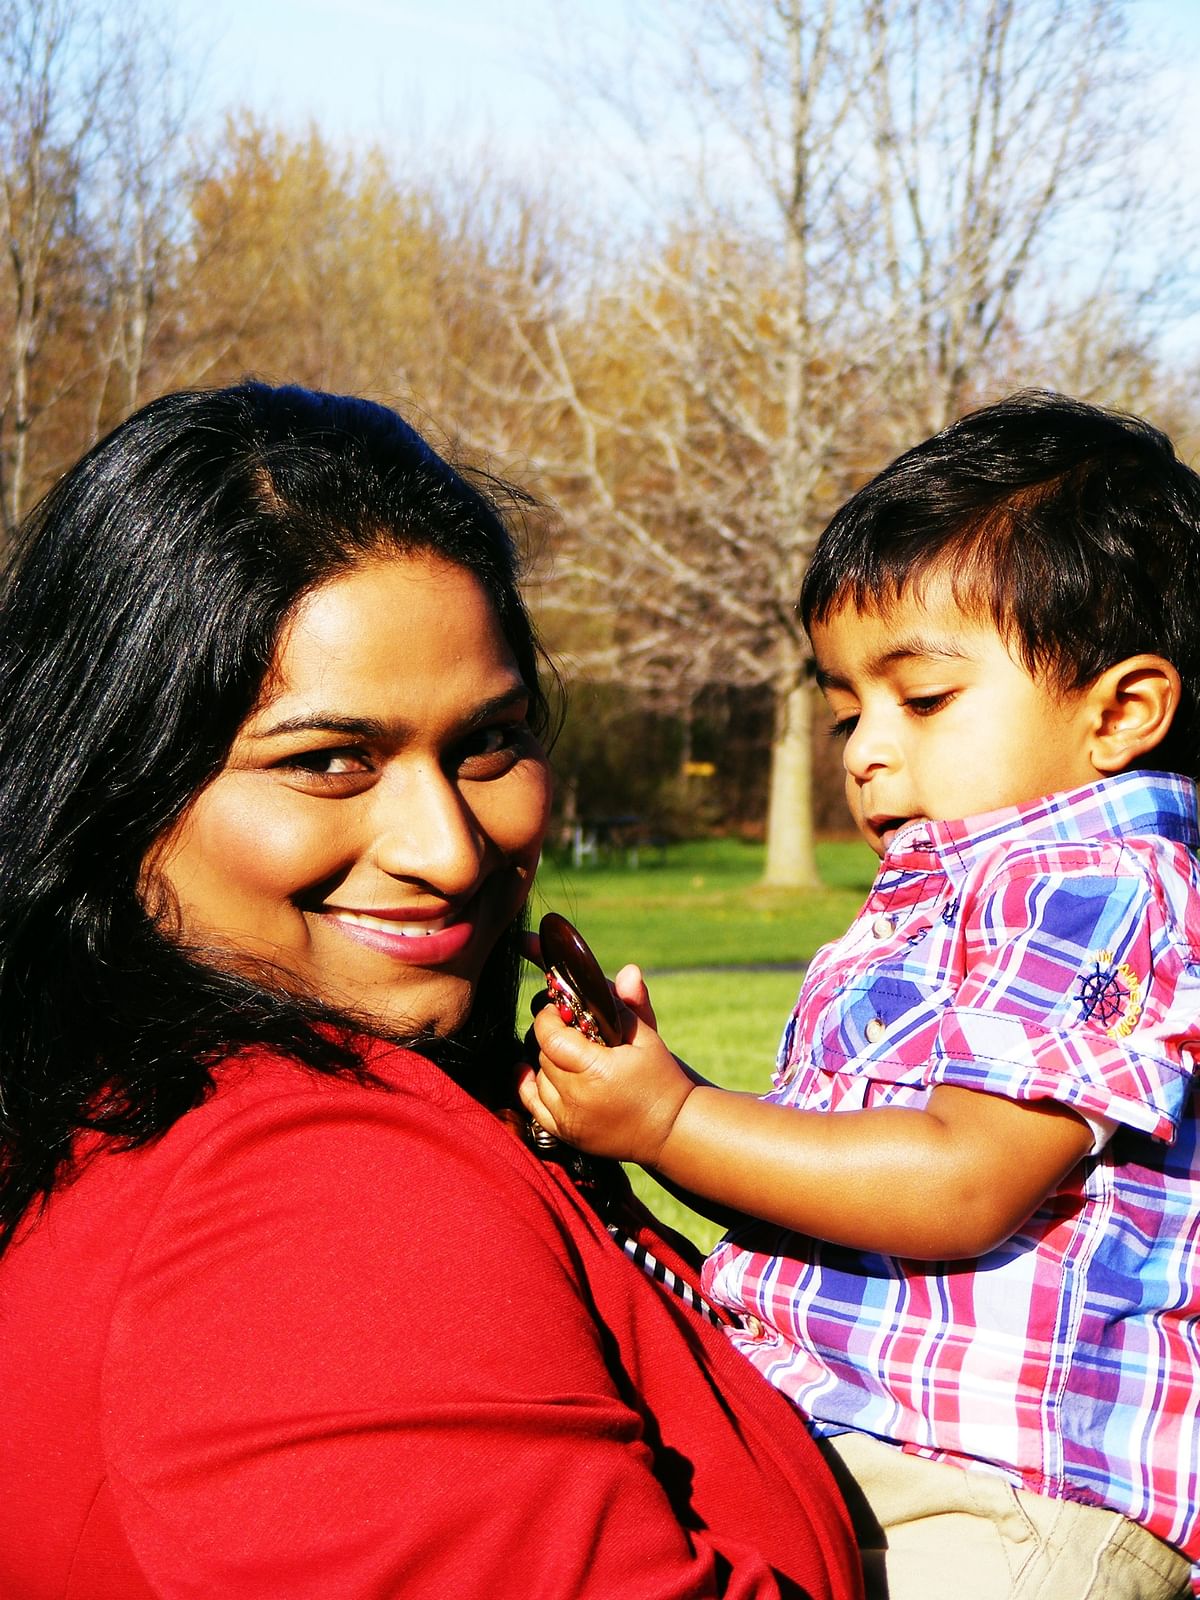 Talk about shared motherhood! This Goan woman in America shared her breast milk with another woman’s baby.